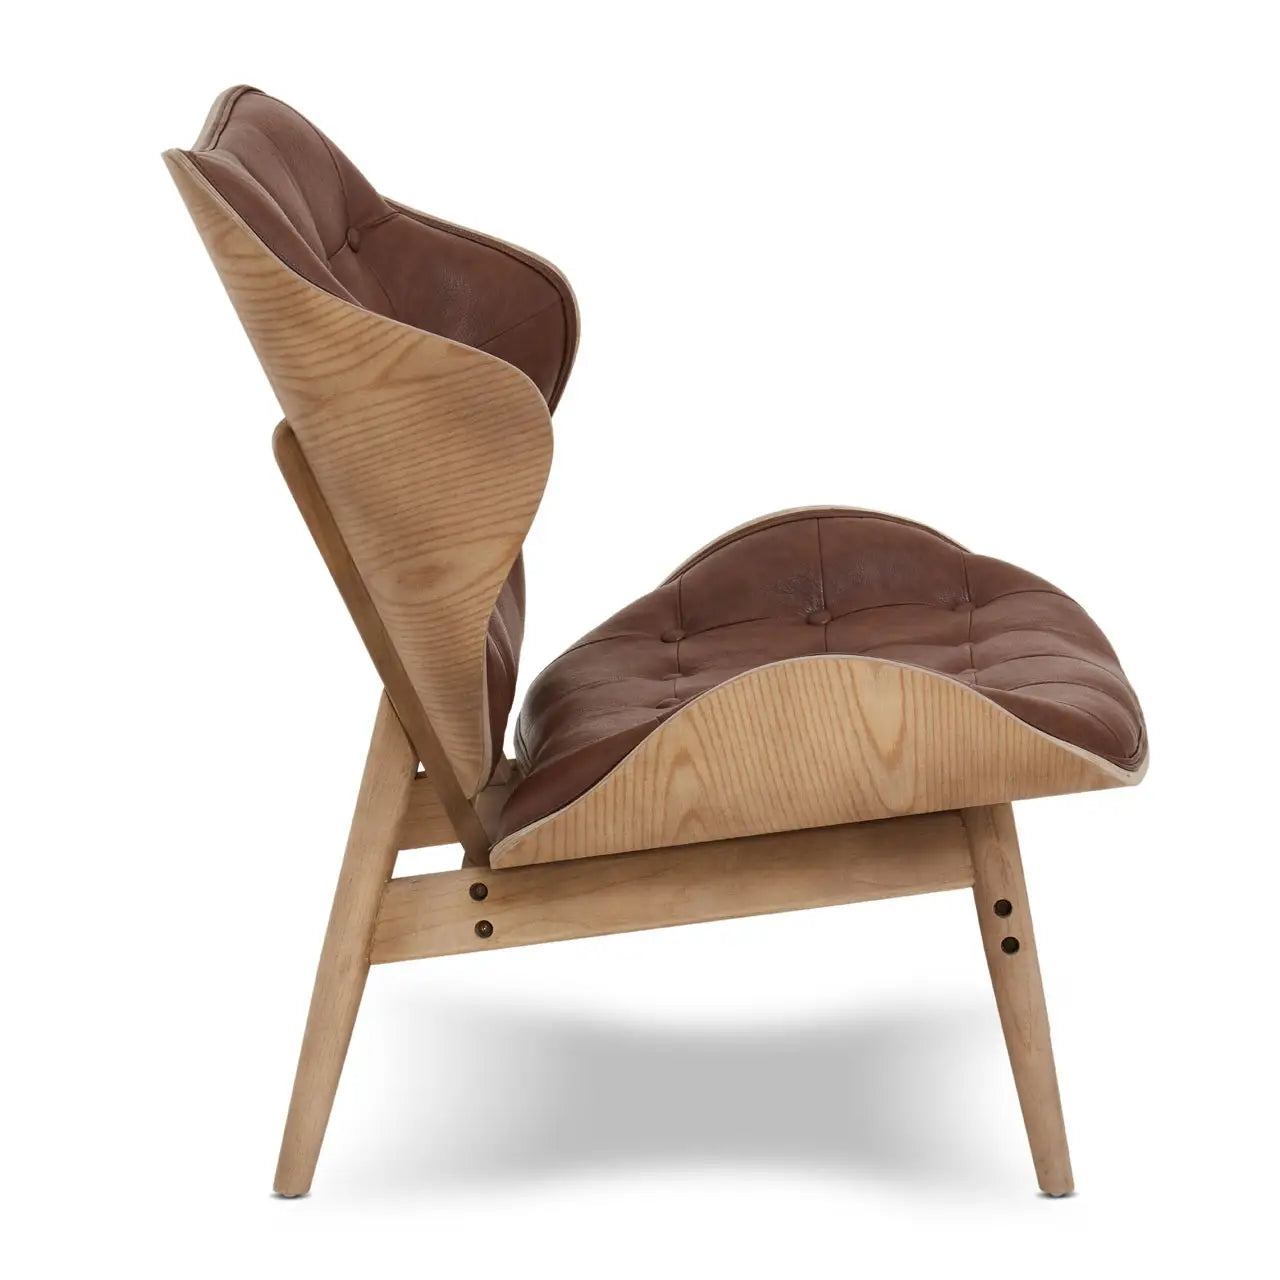 Vinsi Brown Leather Effect Chair with Button Detail - Living In Kin